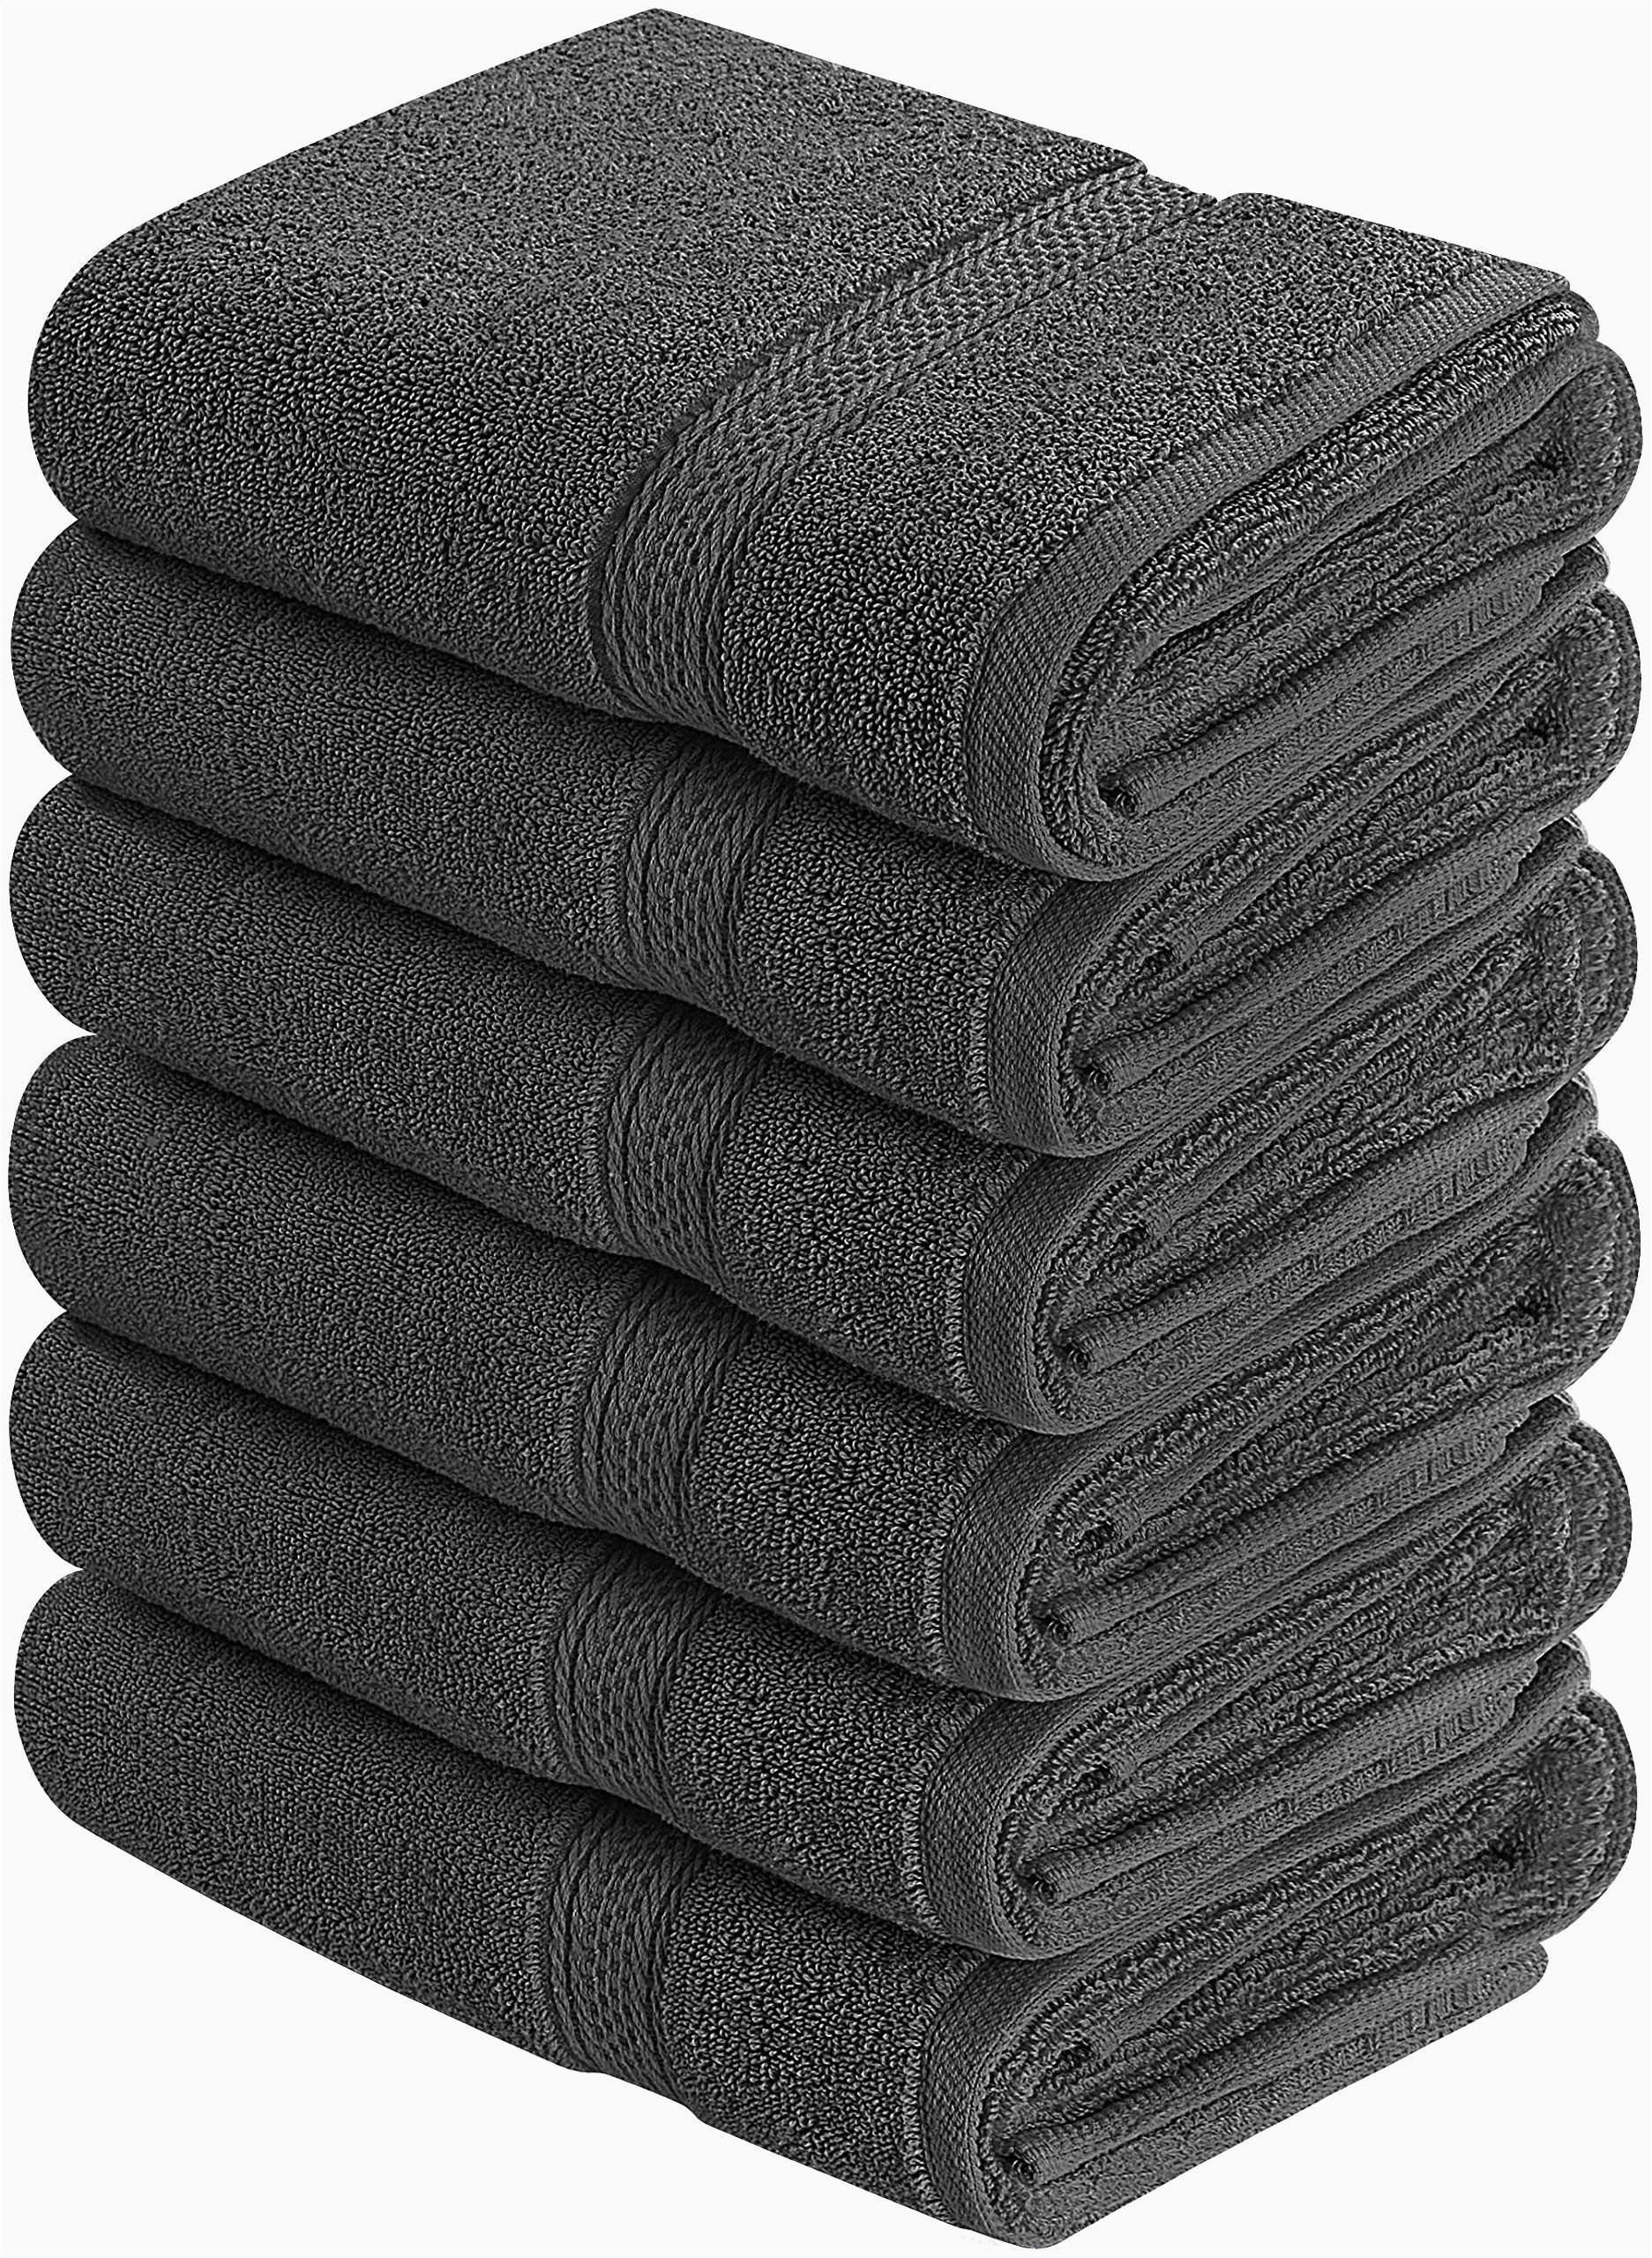 itsoft non slip shaggy chenille bath mat for bathroom rug water absorbent carpet 21 x 34 inches charcoal gray